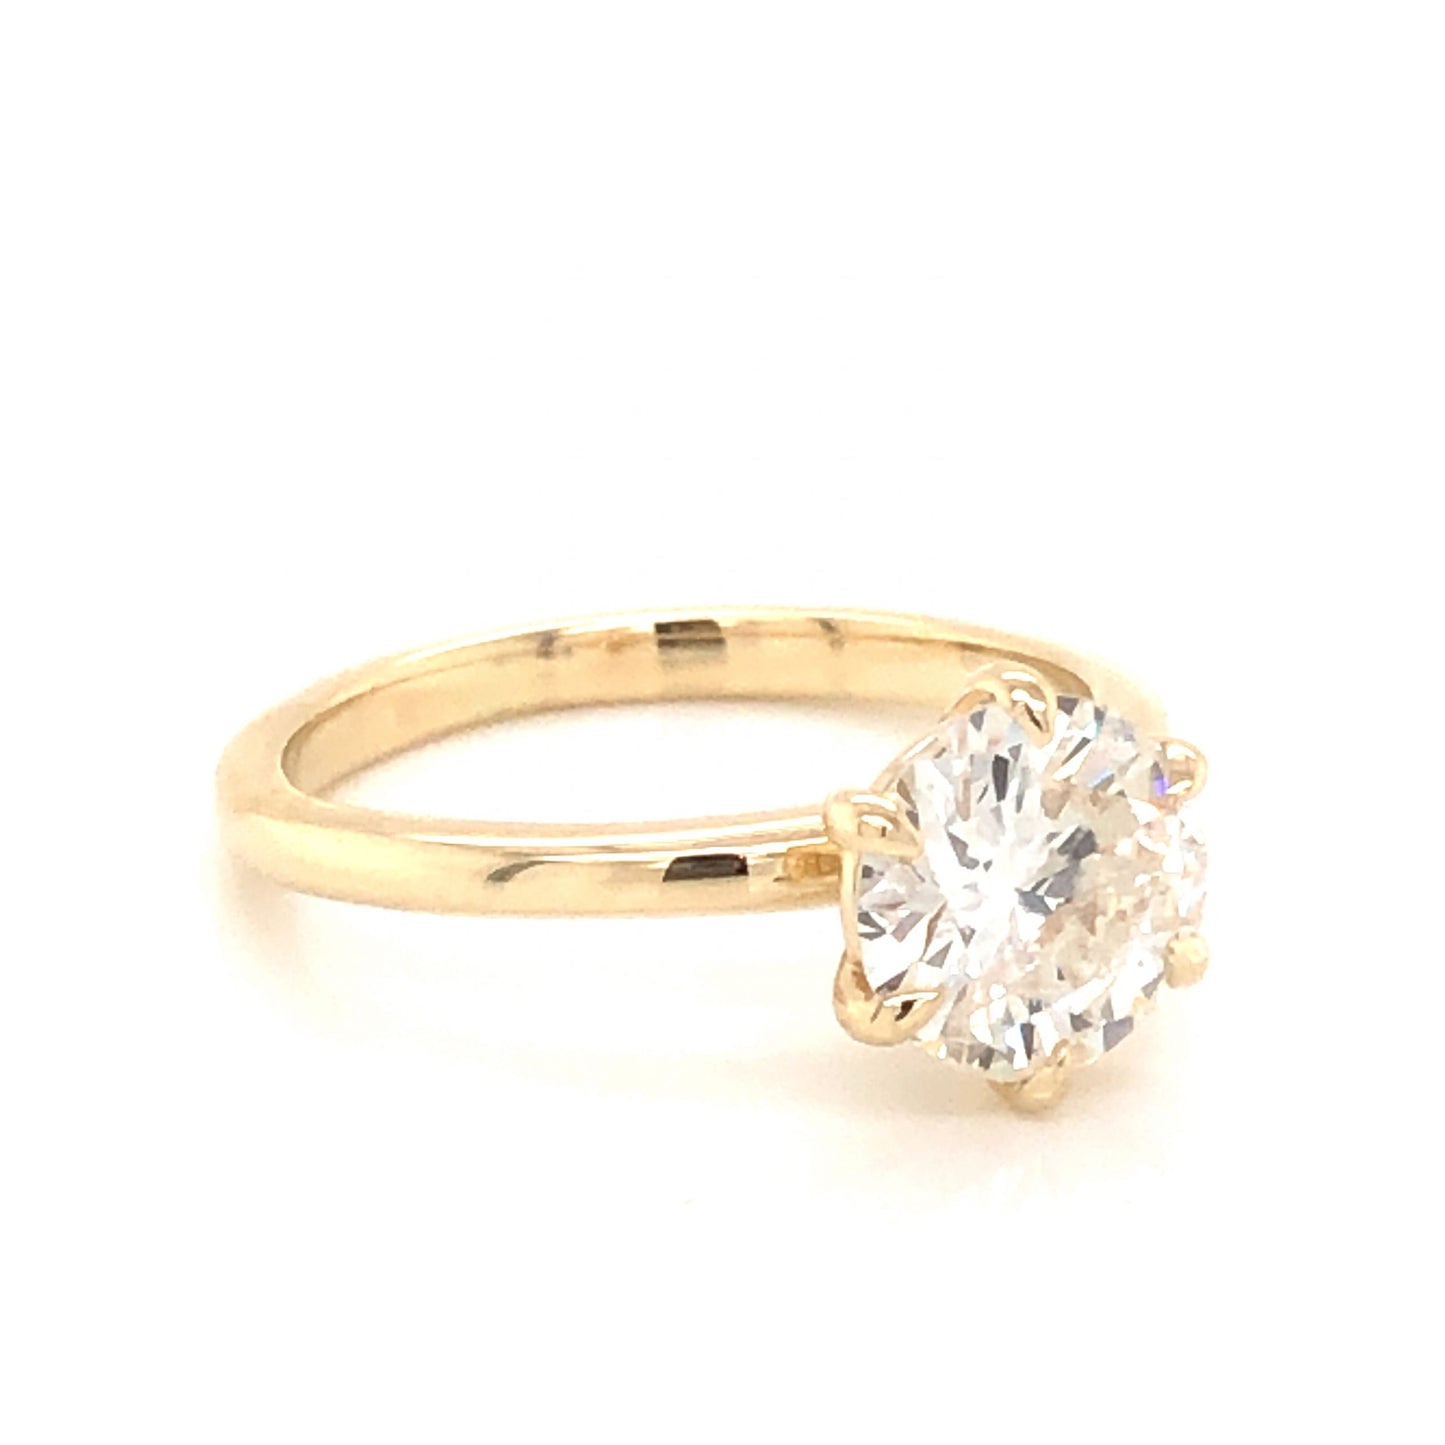 1.44 Solitaire Diamond Engagement Ring in 14K Yellow Gold